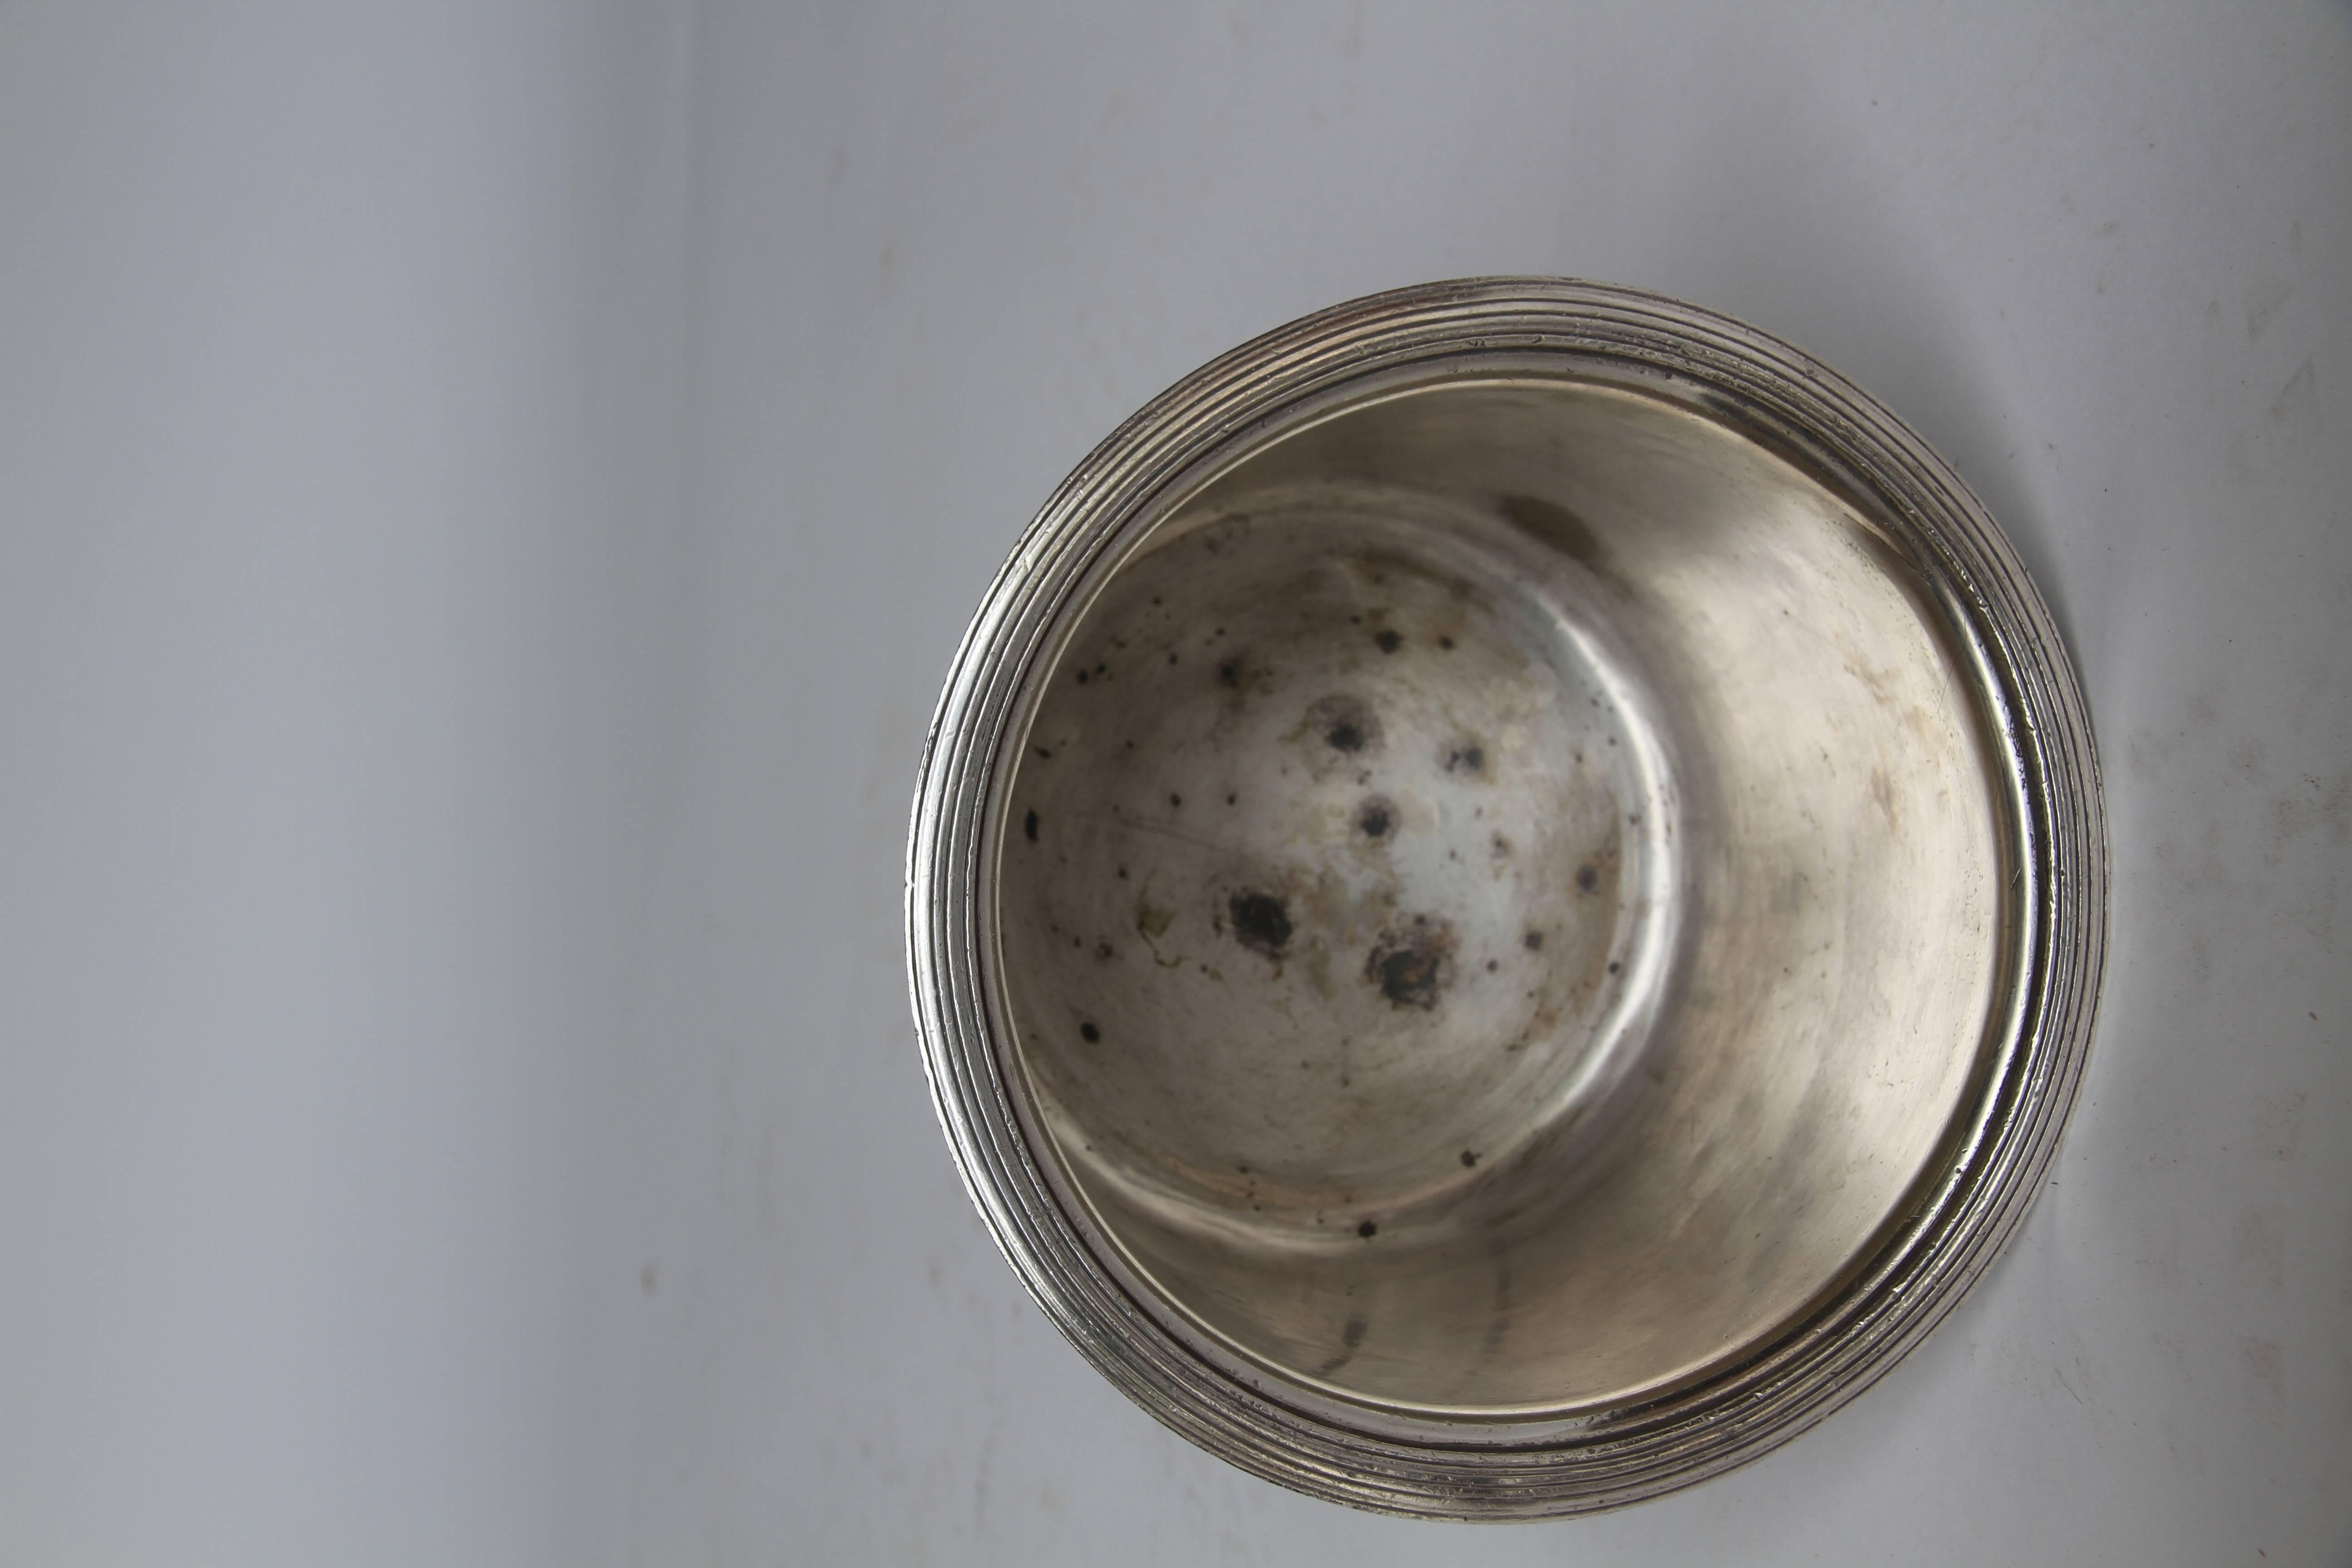 A silver soldered bowl made by the International Silver Co for the Statler Hotel. With a classic shape these pieces were made extra dense and heavy so as not to spill when in use. Marked Hotel Statler, International Silver, Silver Soldered.